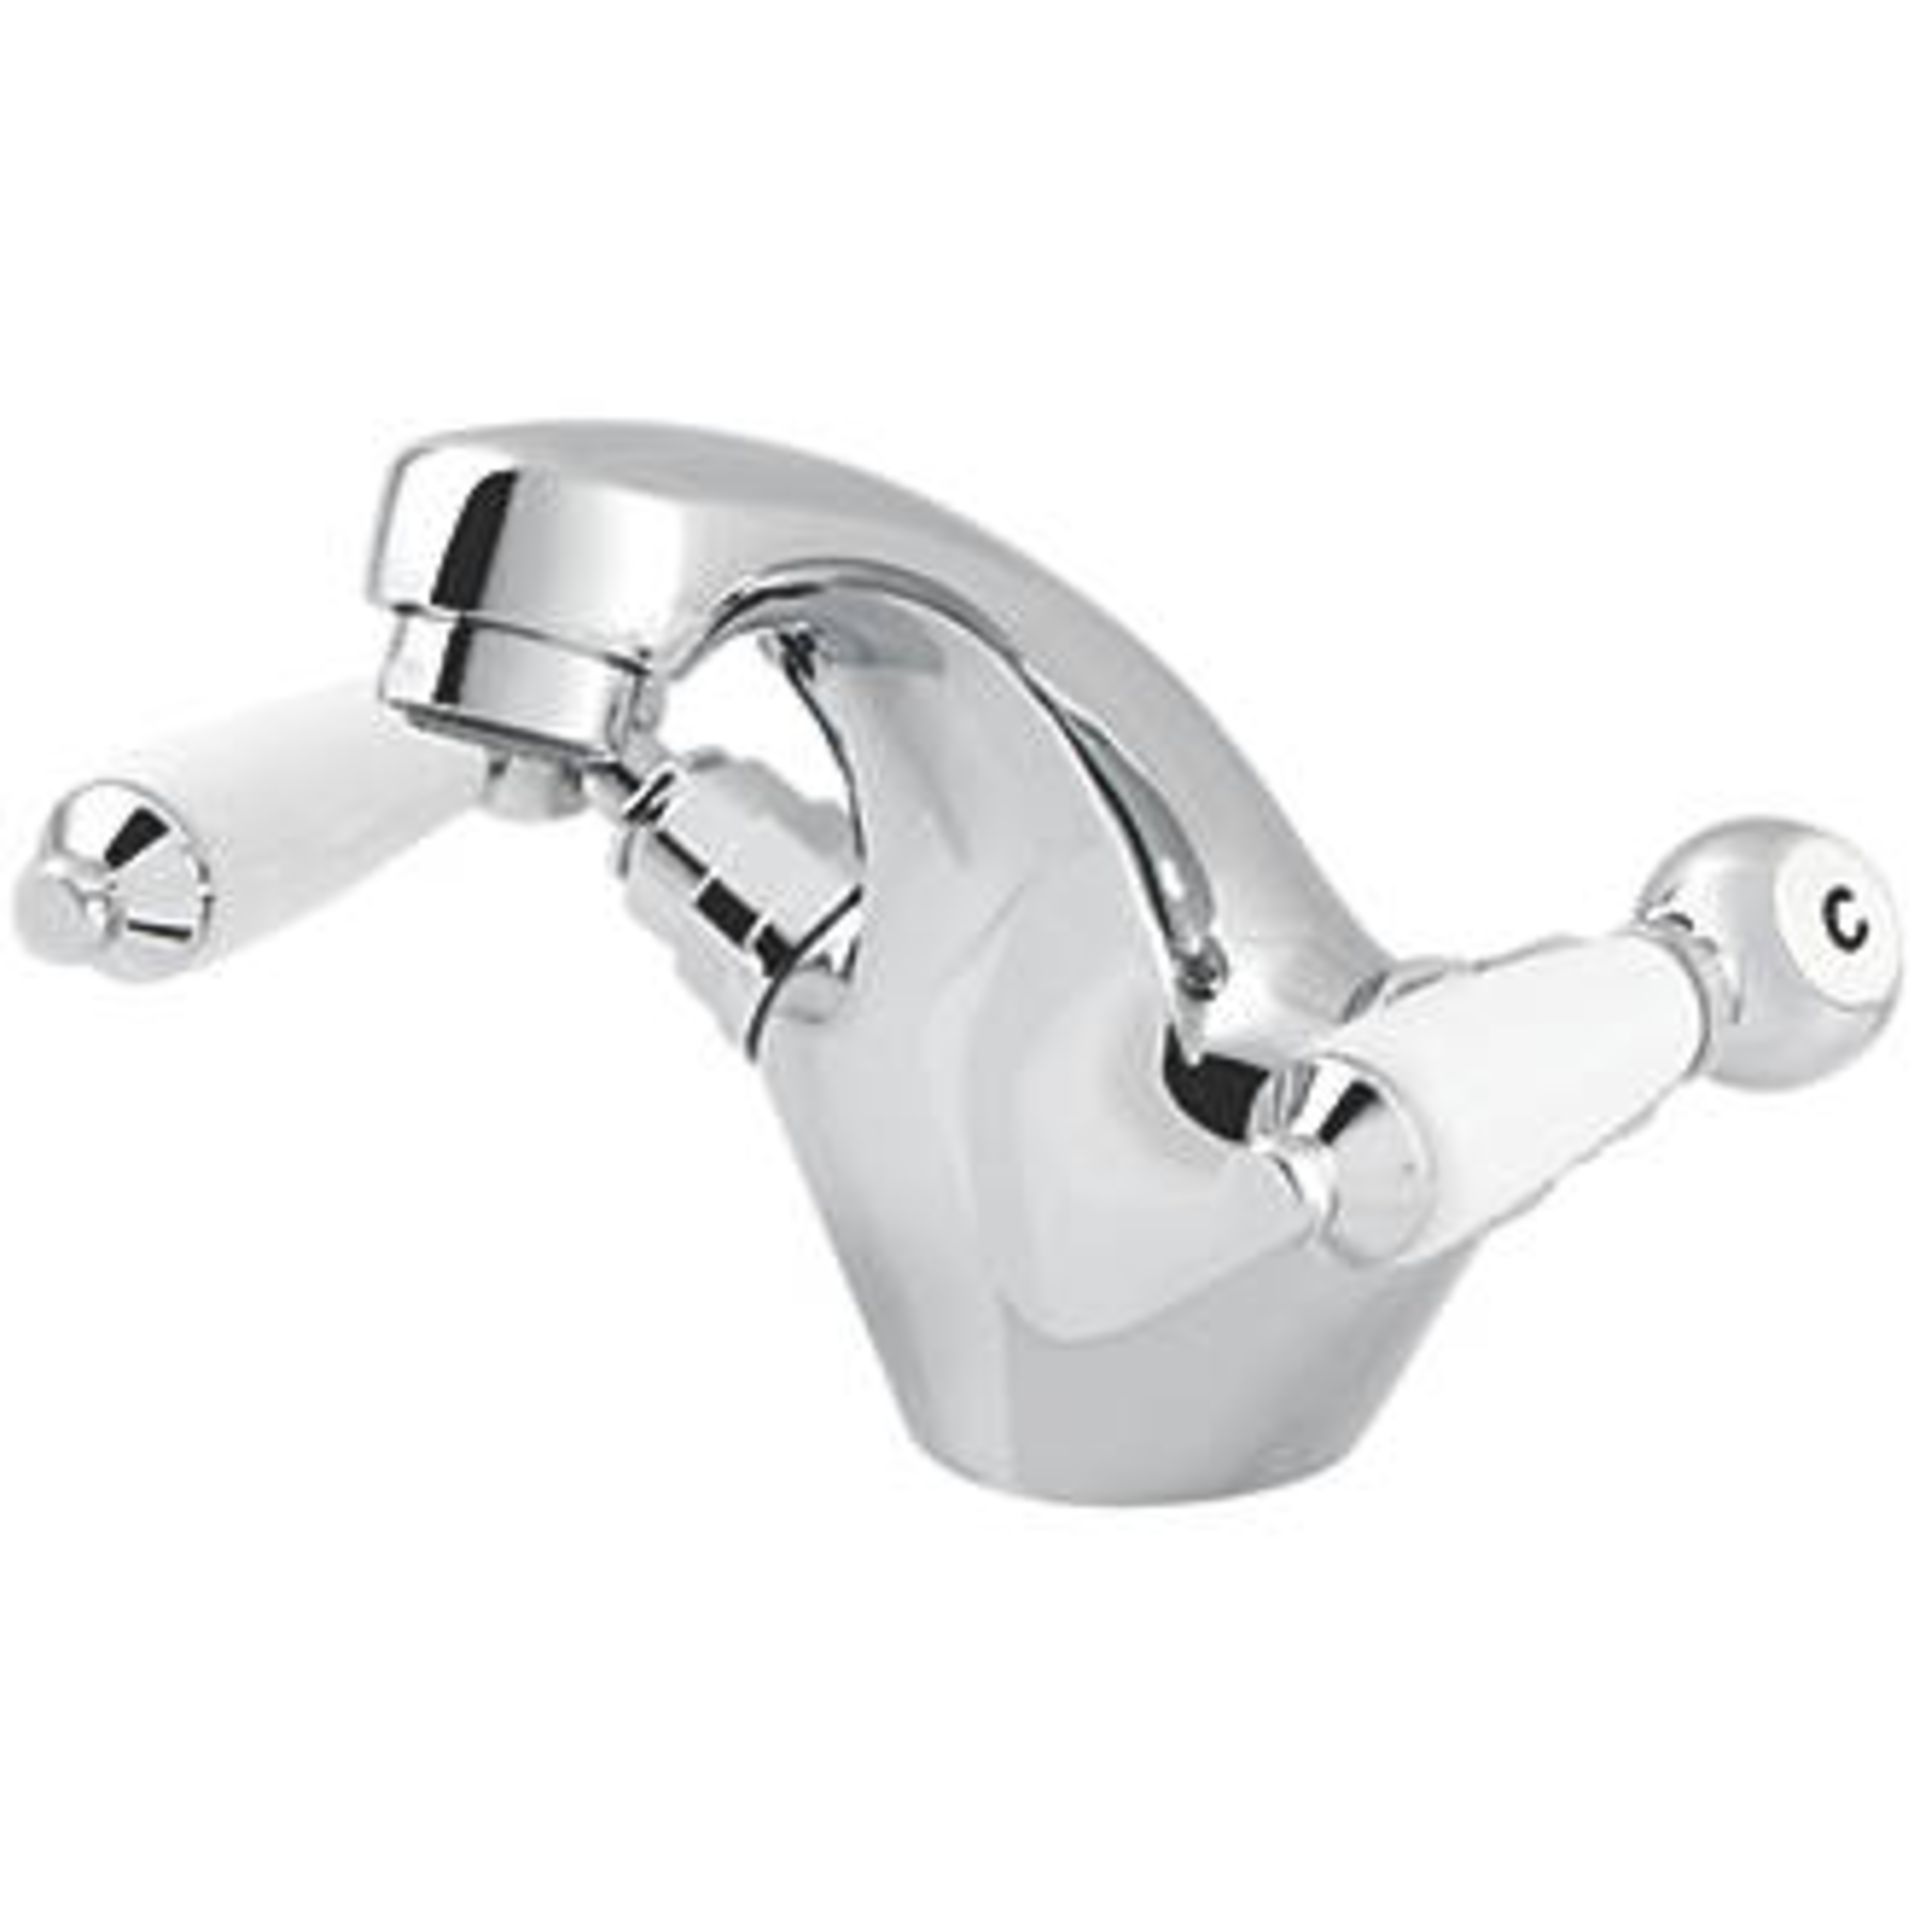 (DF127) NEW Brean 2 lever Chrome-plated Traditional Basin Mono mixer Tap. This traditional styl...